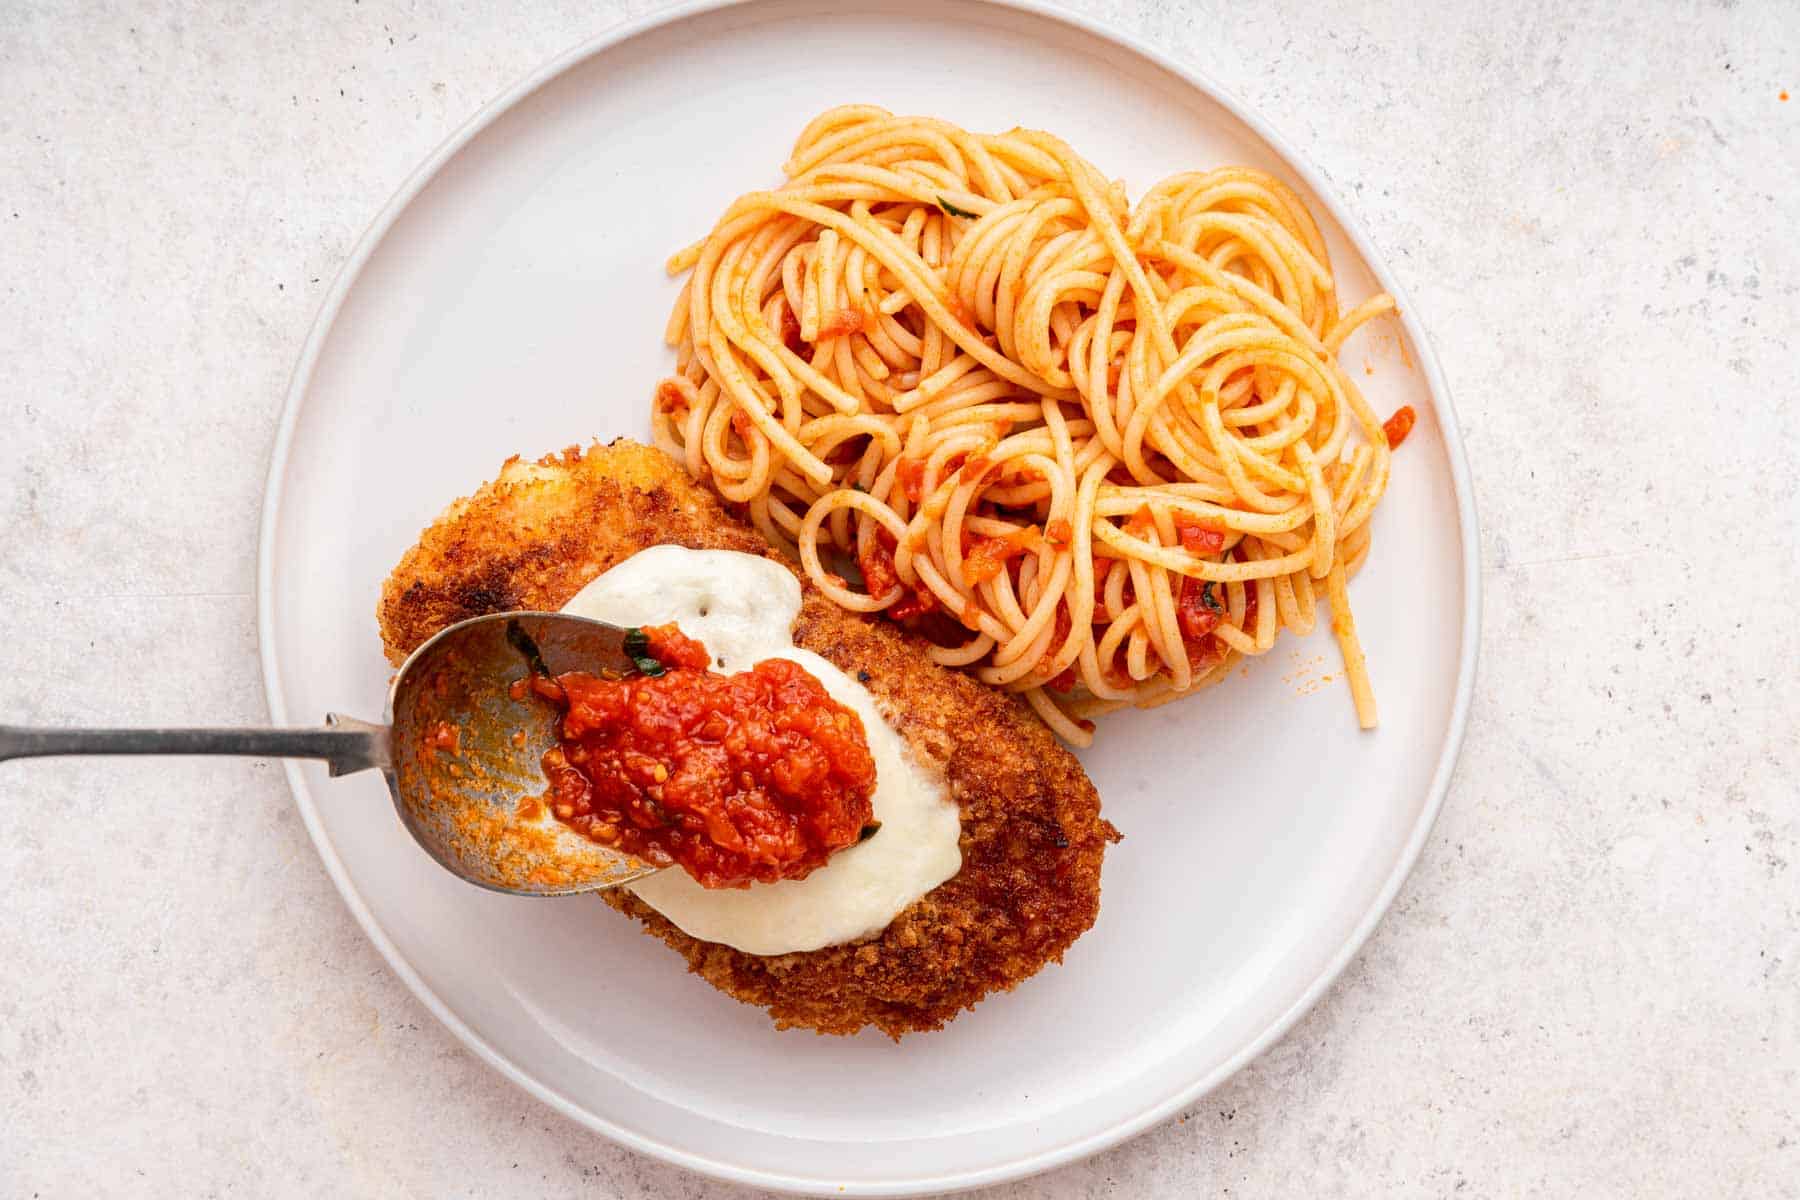 White plate with spaghetti noodles and chicken parmesan on the side.